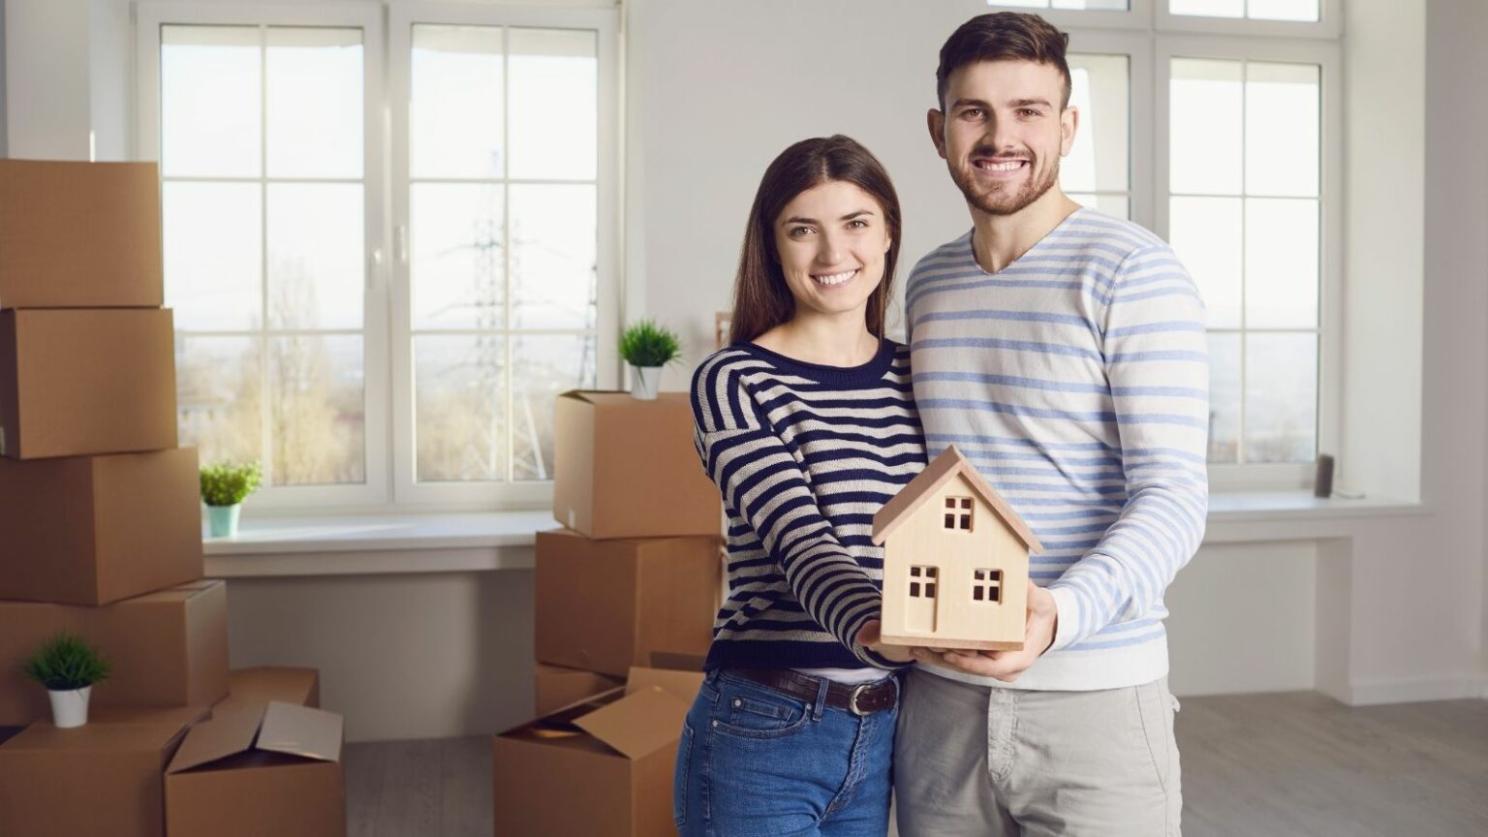 What Is The Process Of Getting A Mortgage As A First-Time Homebuyer?